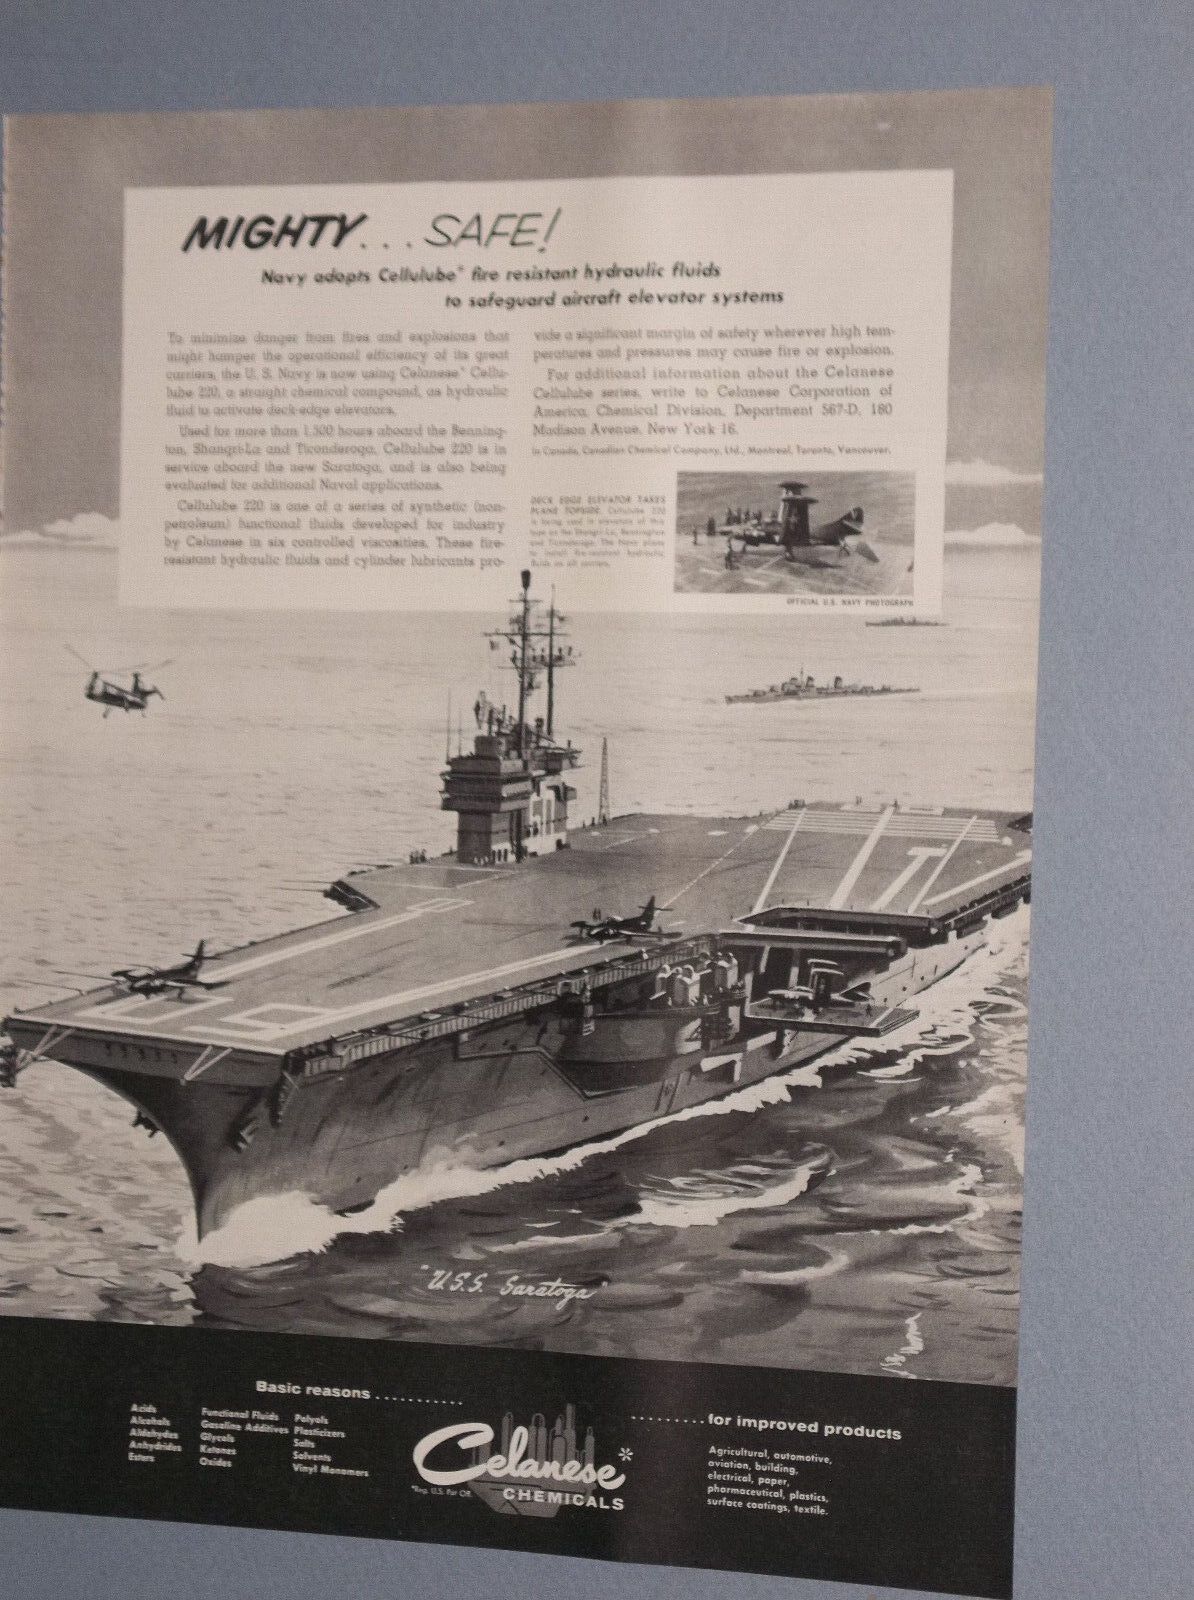 1956 CELANESE CHEMICALS AD W/ U.S.S. SARATOGA AIRCRAFT CARRIER